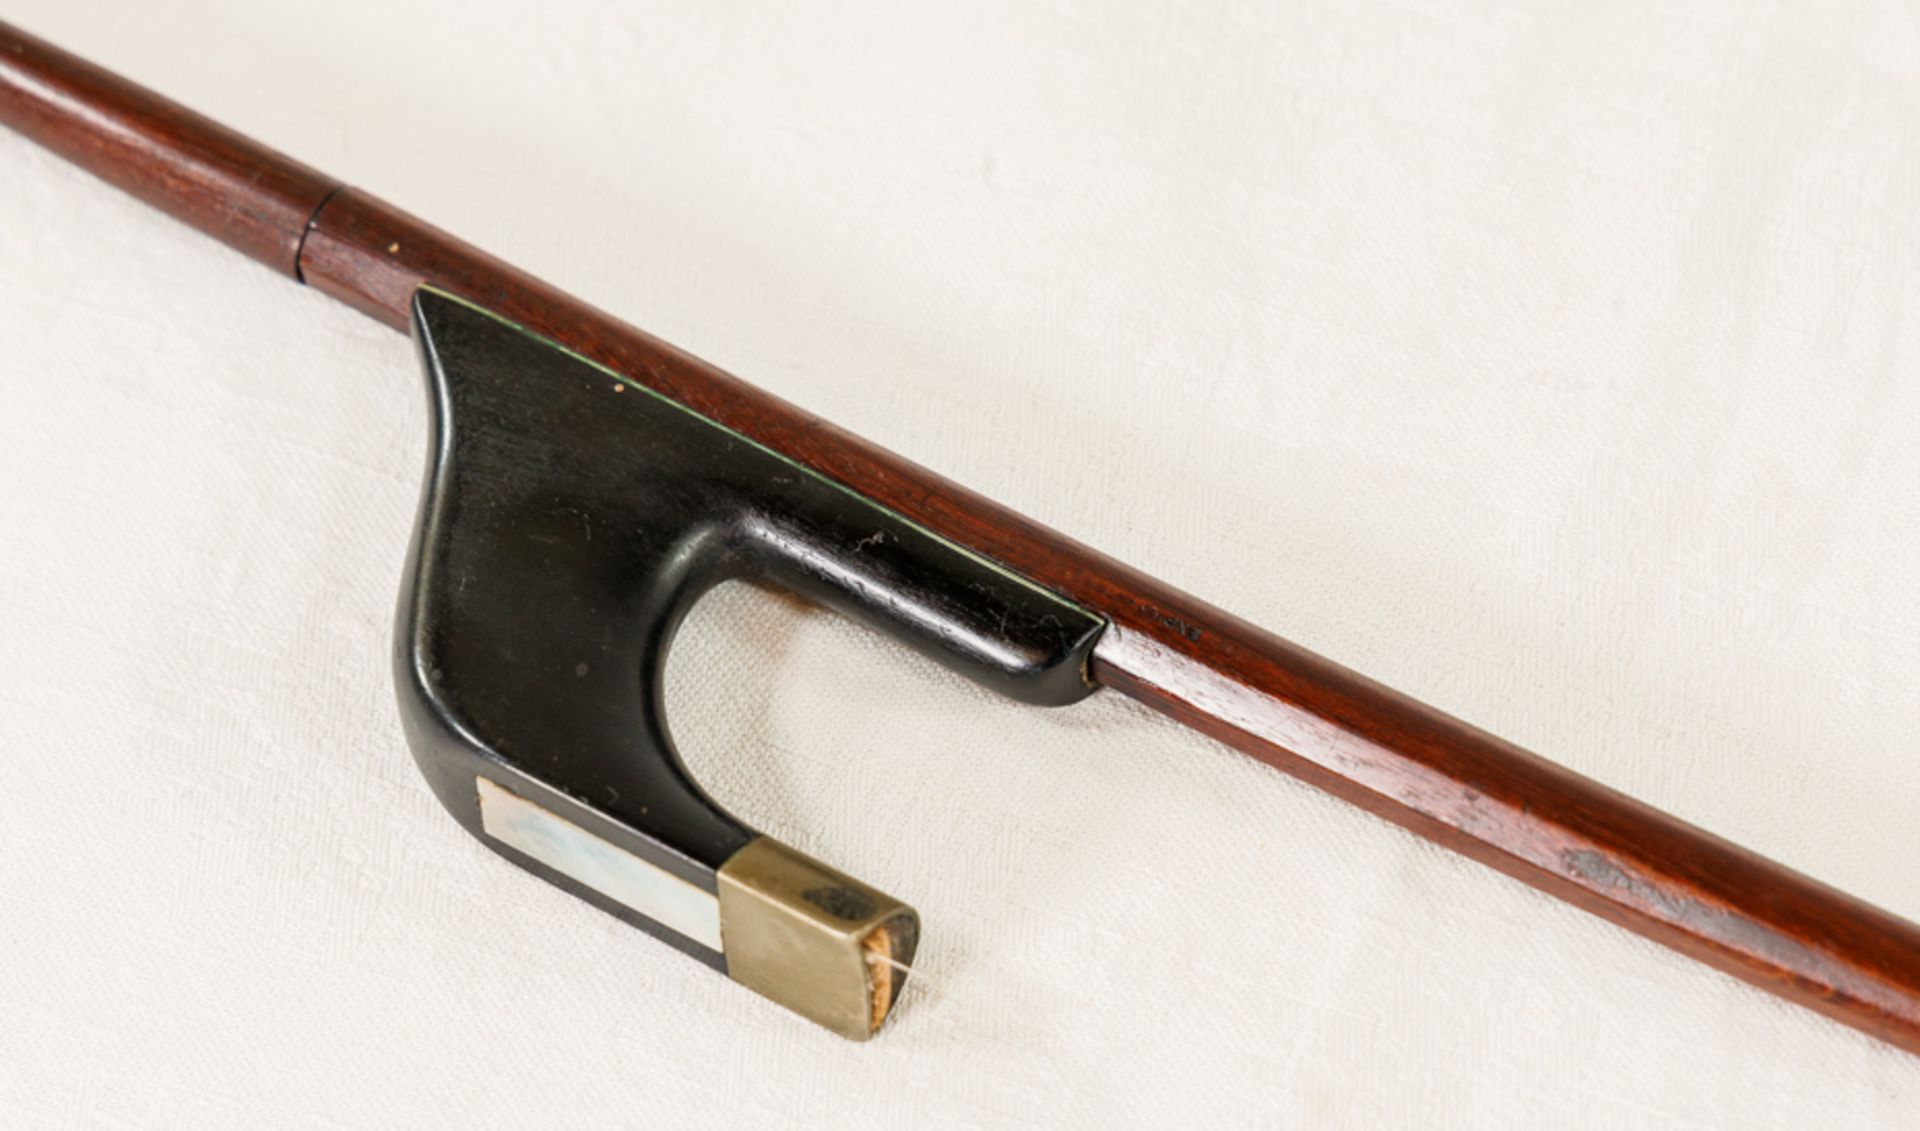 DOUBLE BASS BOW “EXPION” BY EMILE AUGUSTE OUCHARD ET FILS - Image 3 of 6